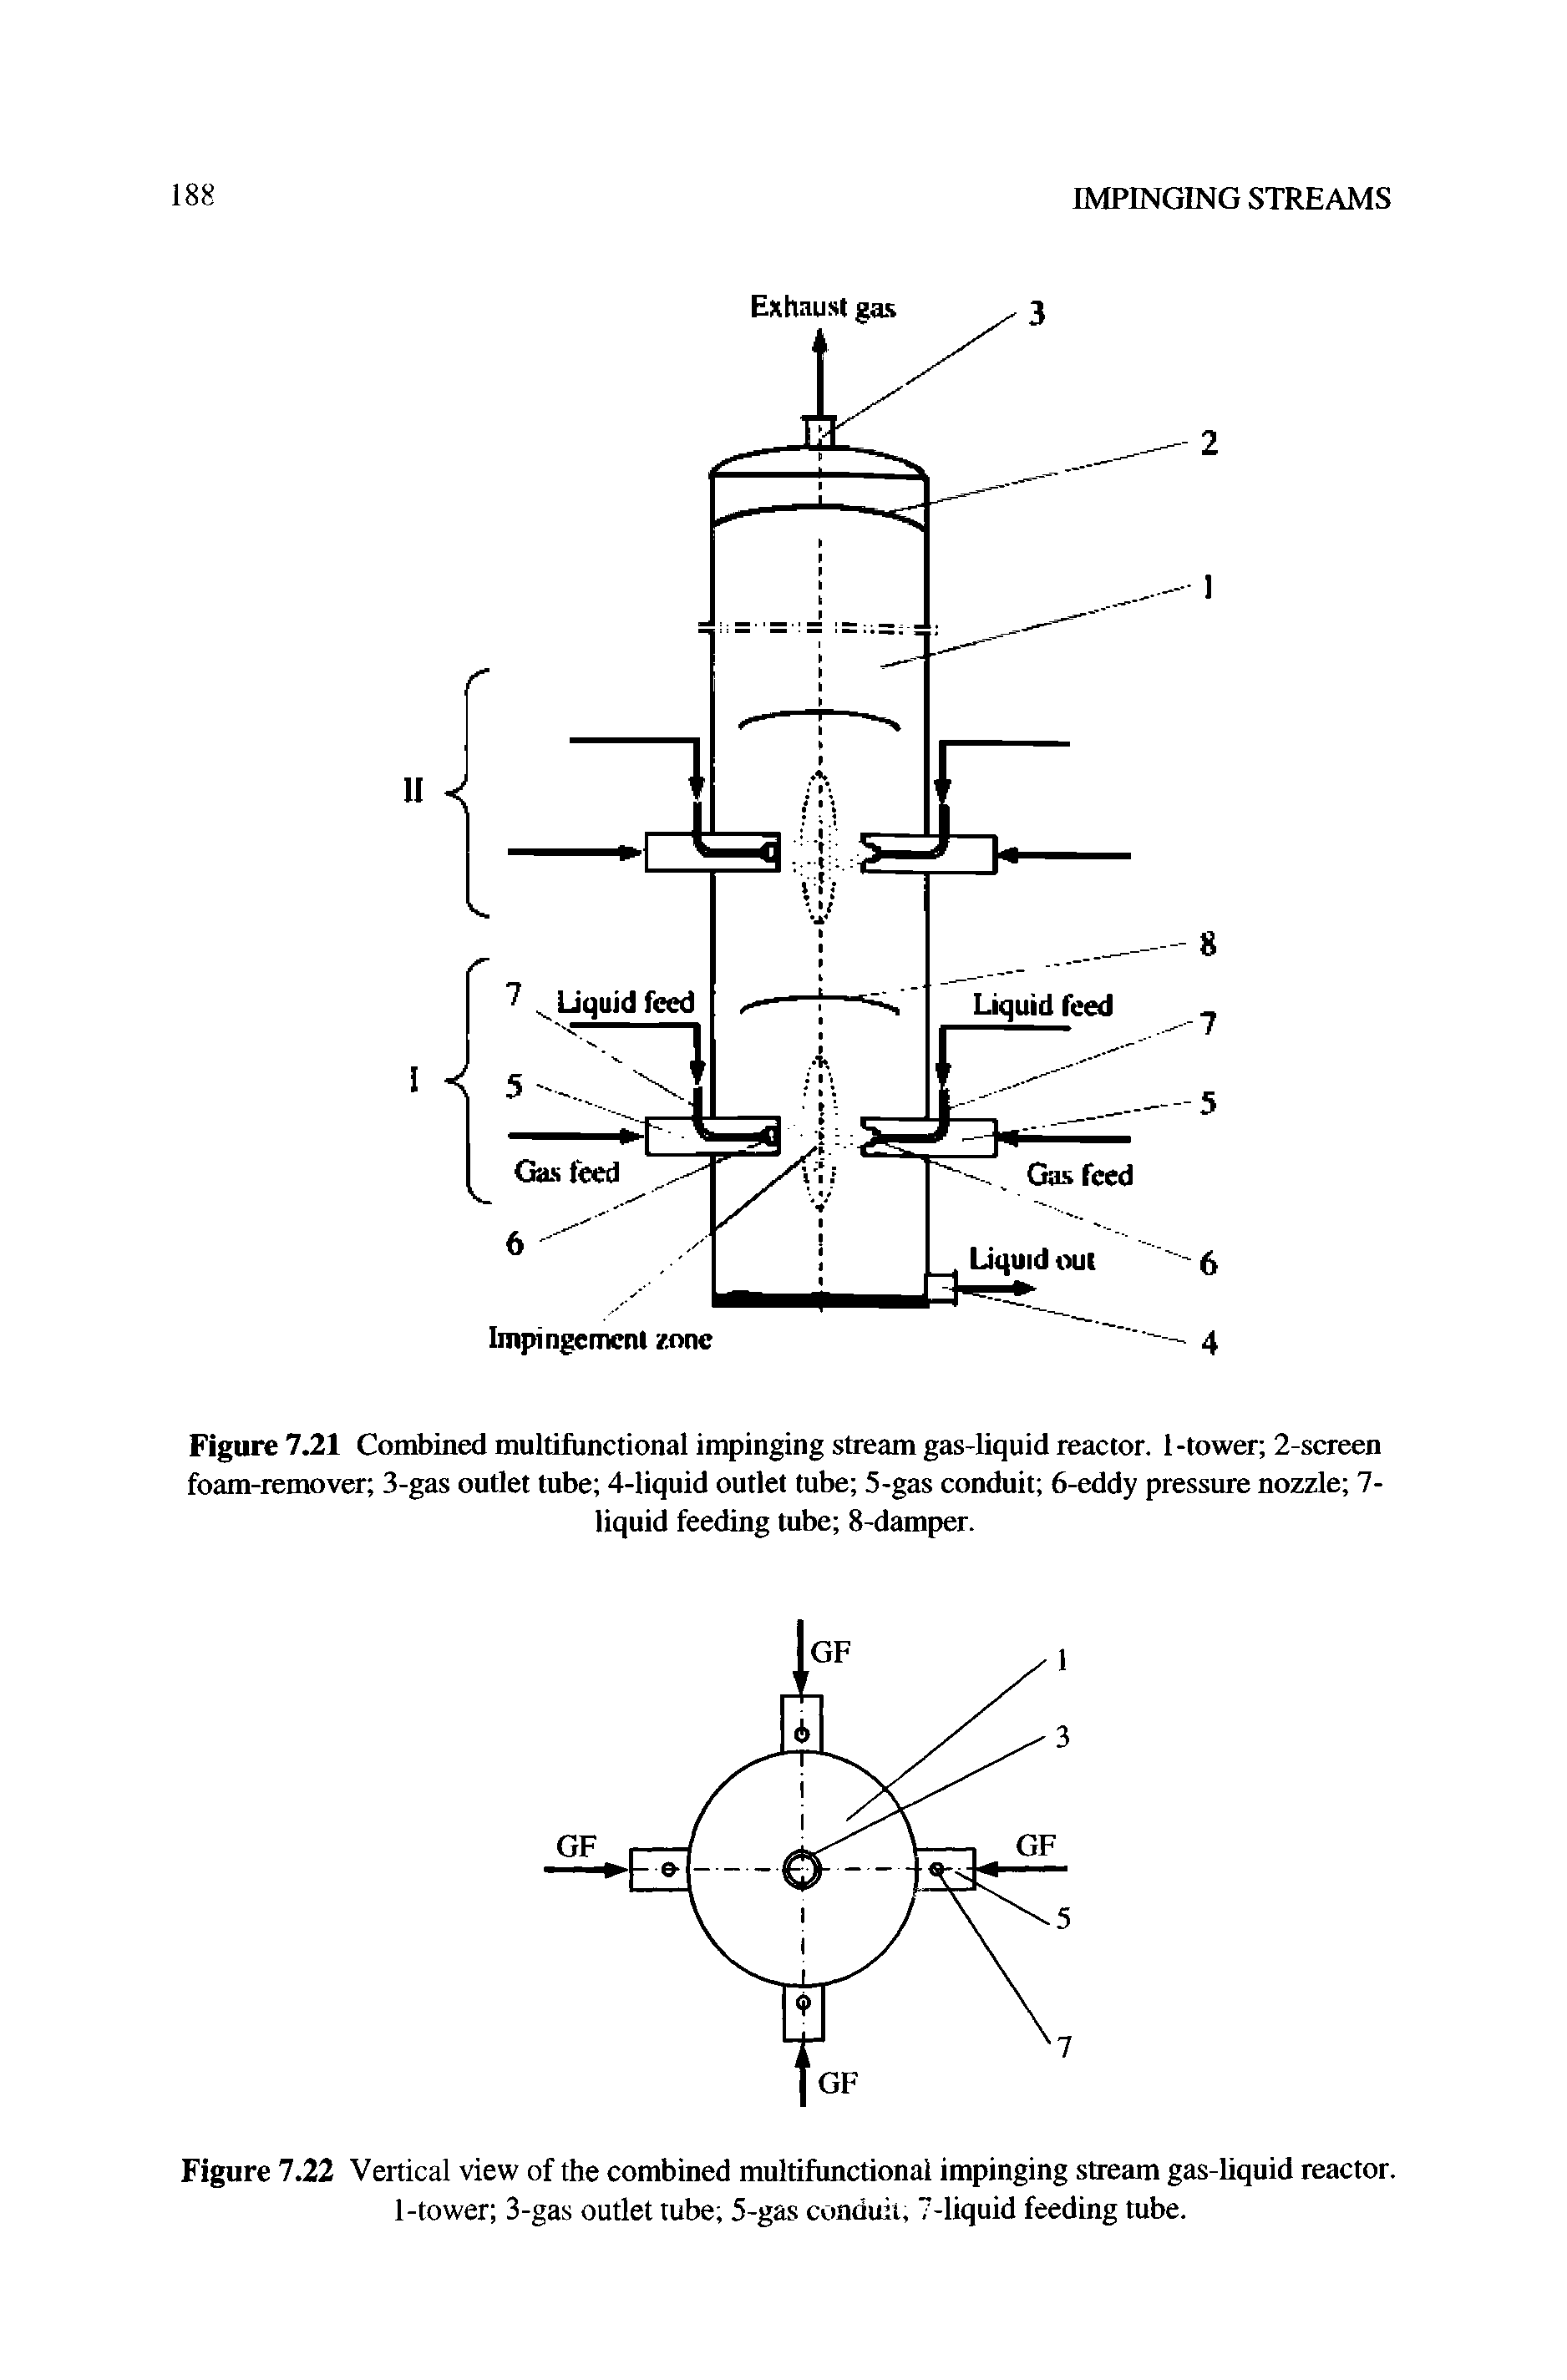 Figure 7.22 Vertical view of the combined multifunctional impinging stream gas-liquid reactor. 1-tower 3-gas outlet tube 5-gas conduit, 7-liquid feeding tube.